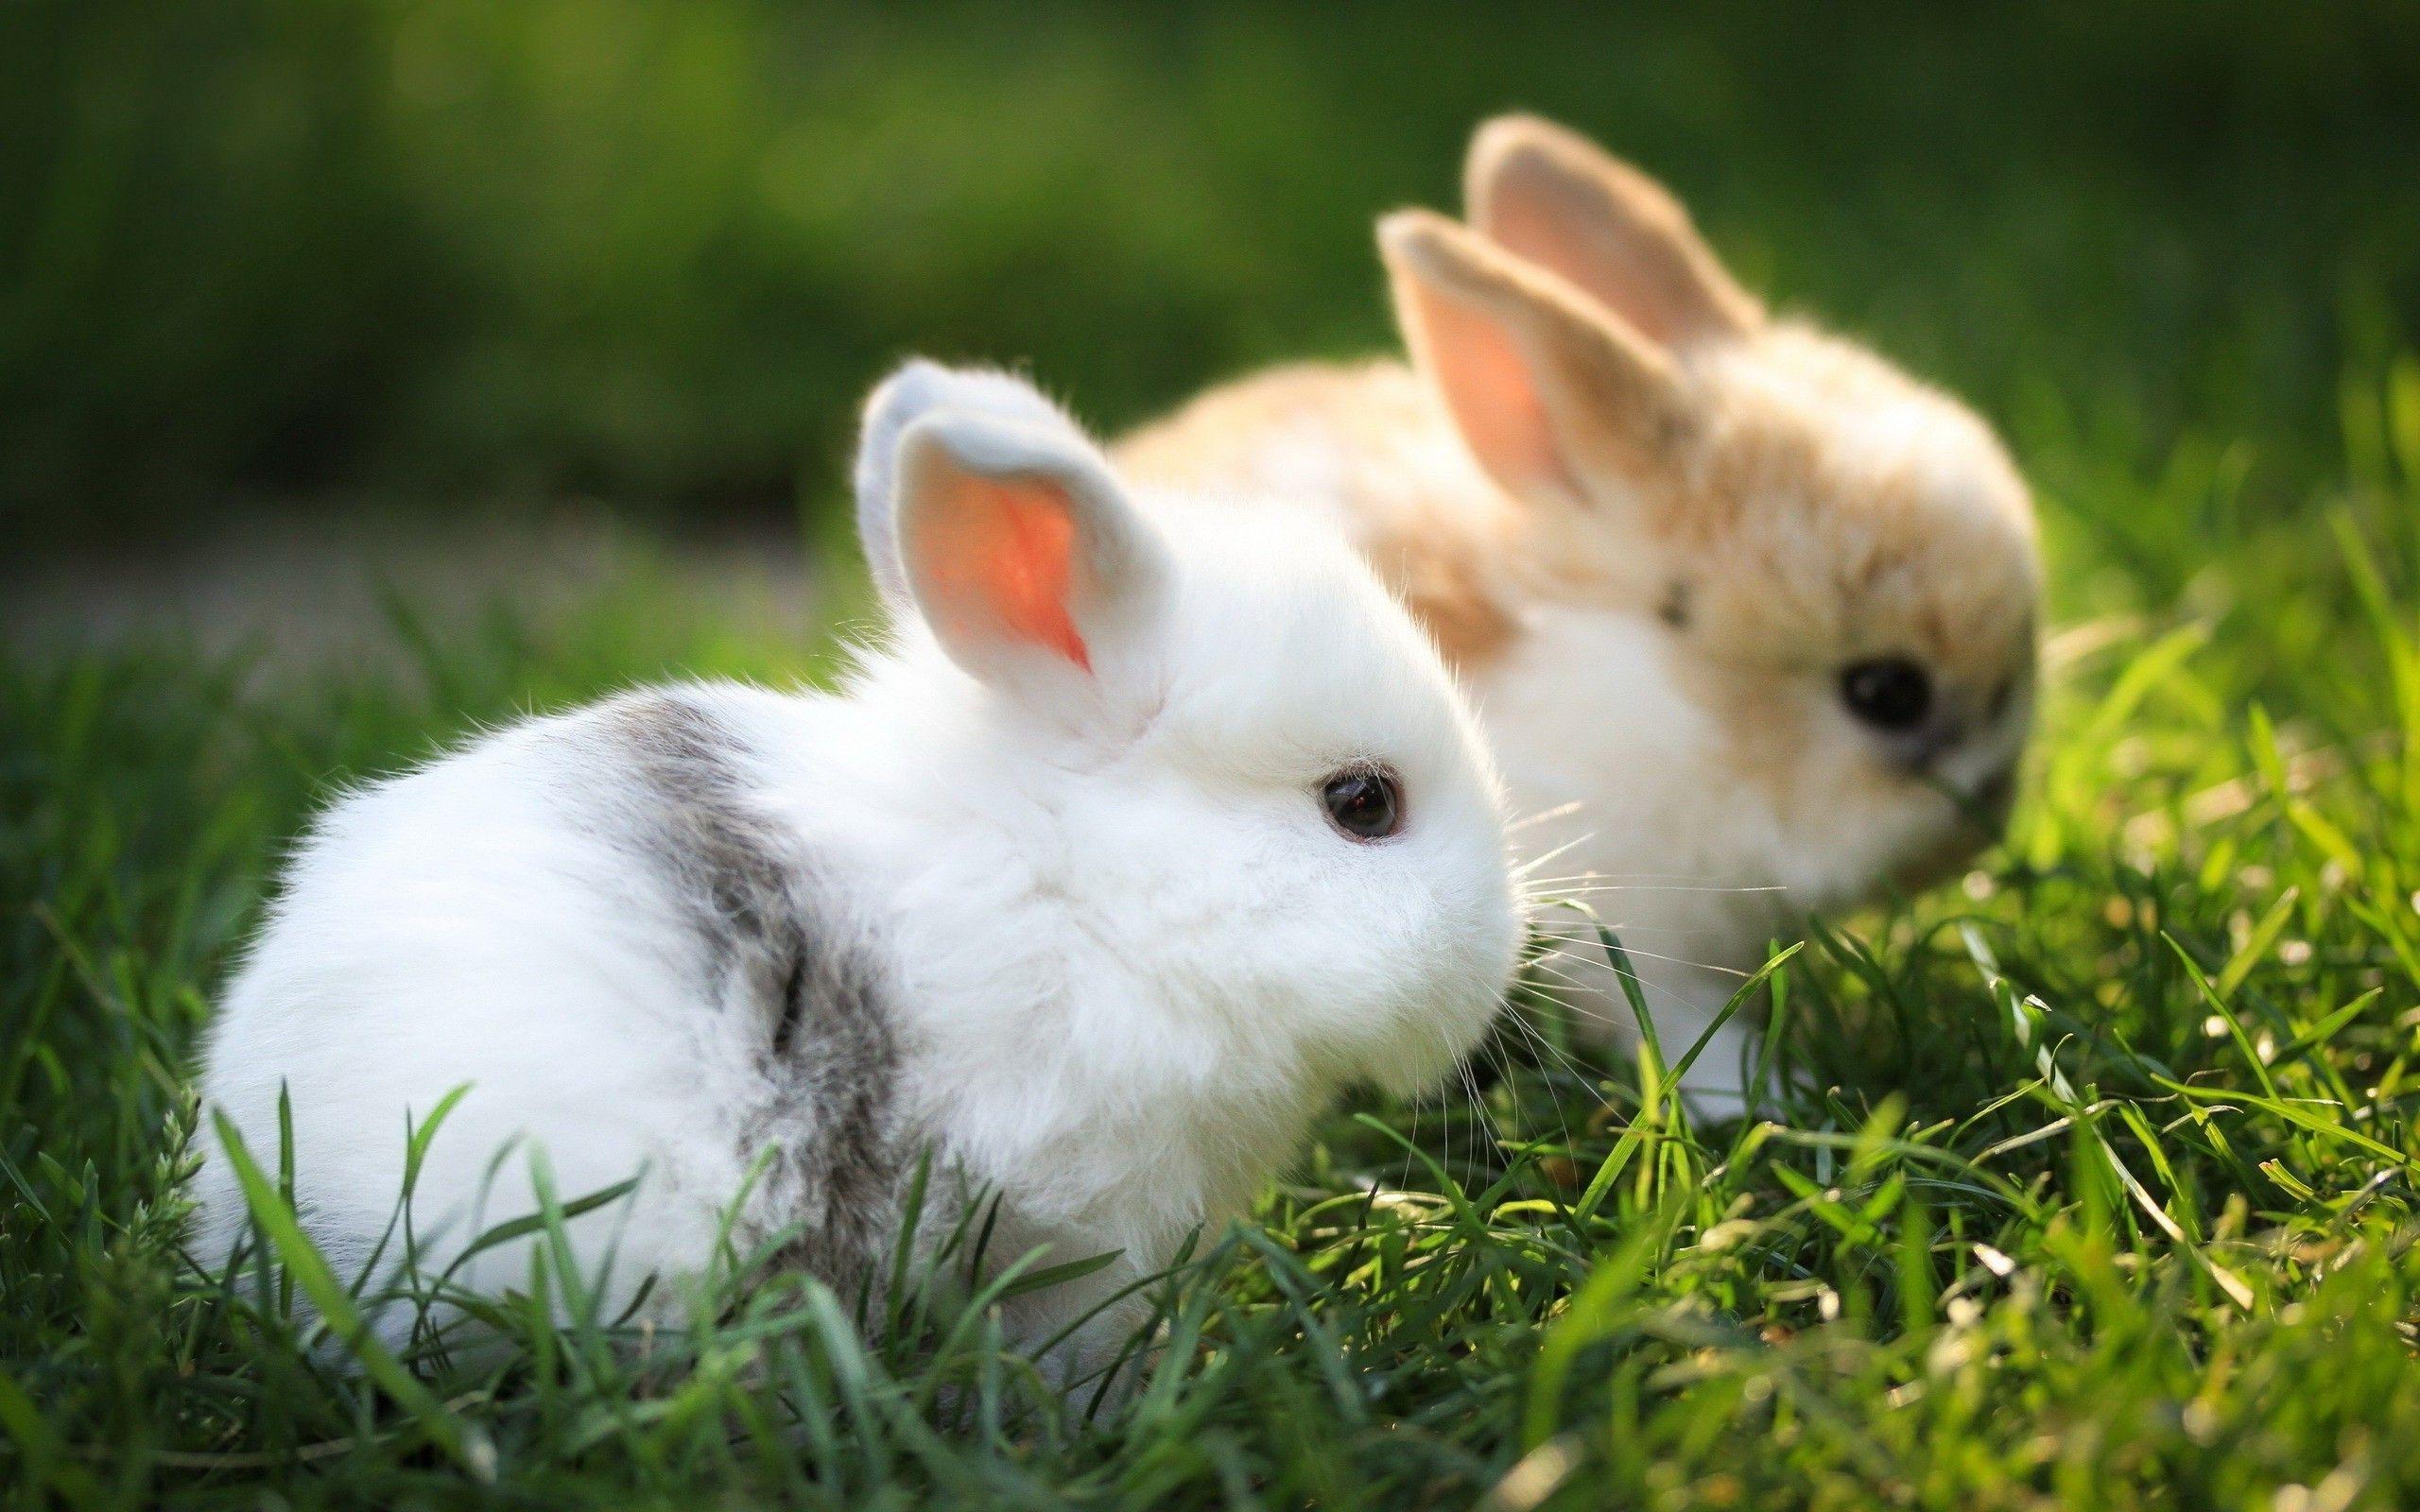 cool Cute Baby Rabbits Photo Love It